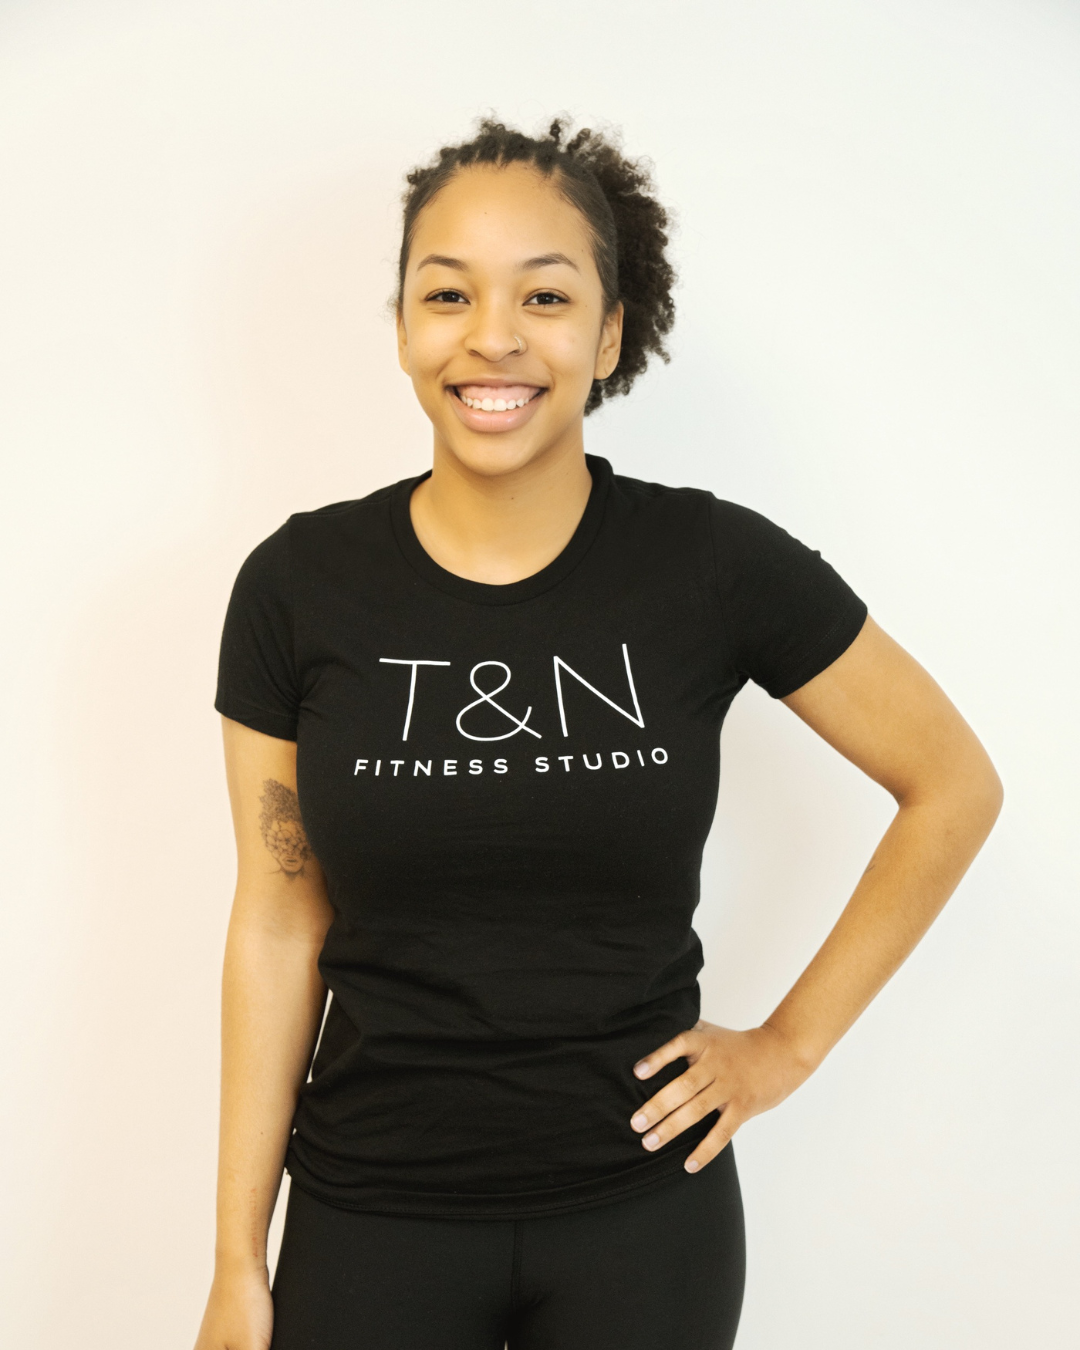 A woman wearing a black t-shirt that says TN Fitness Studio is part of the team.